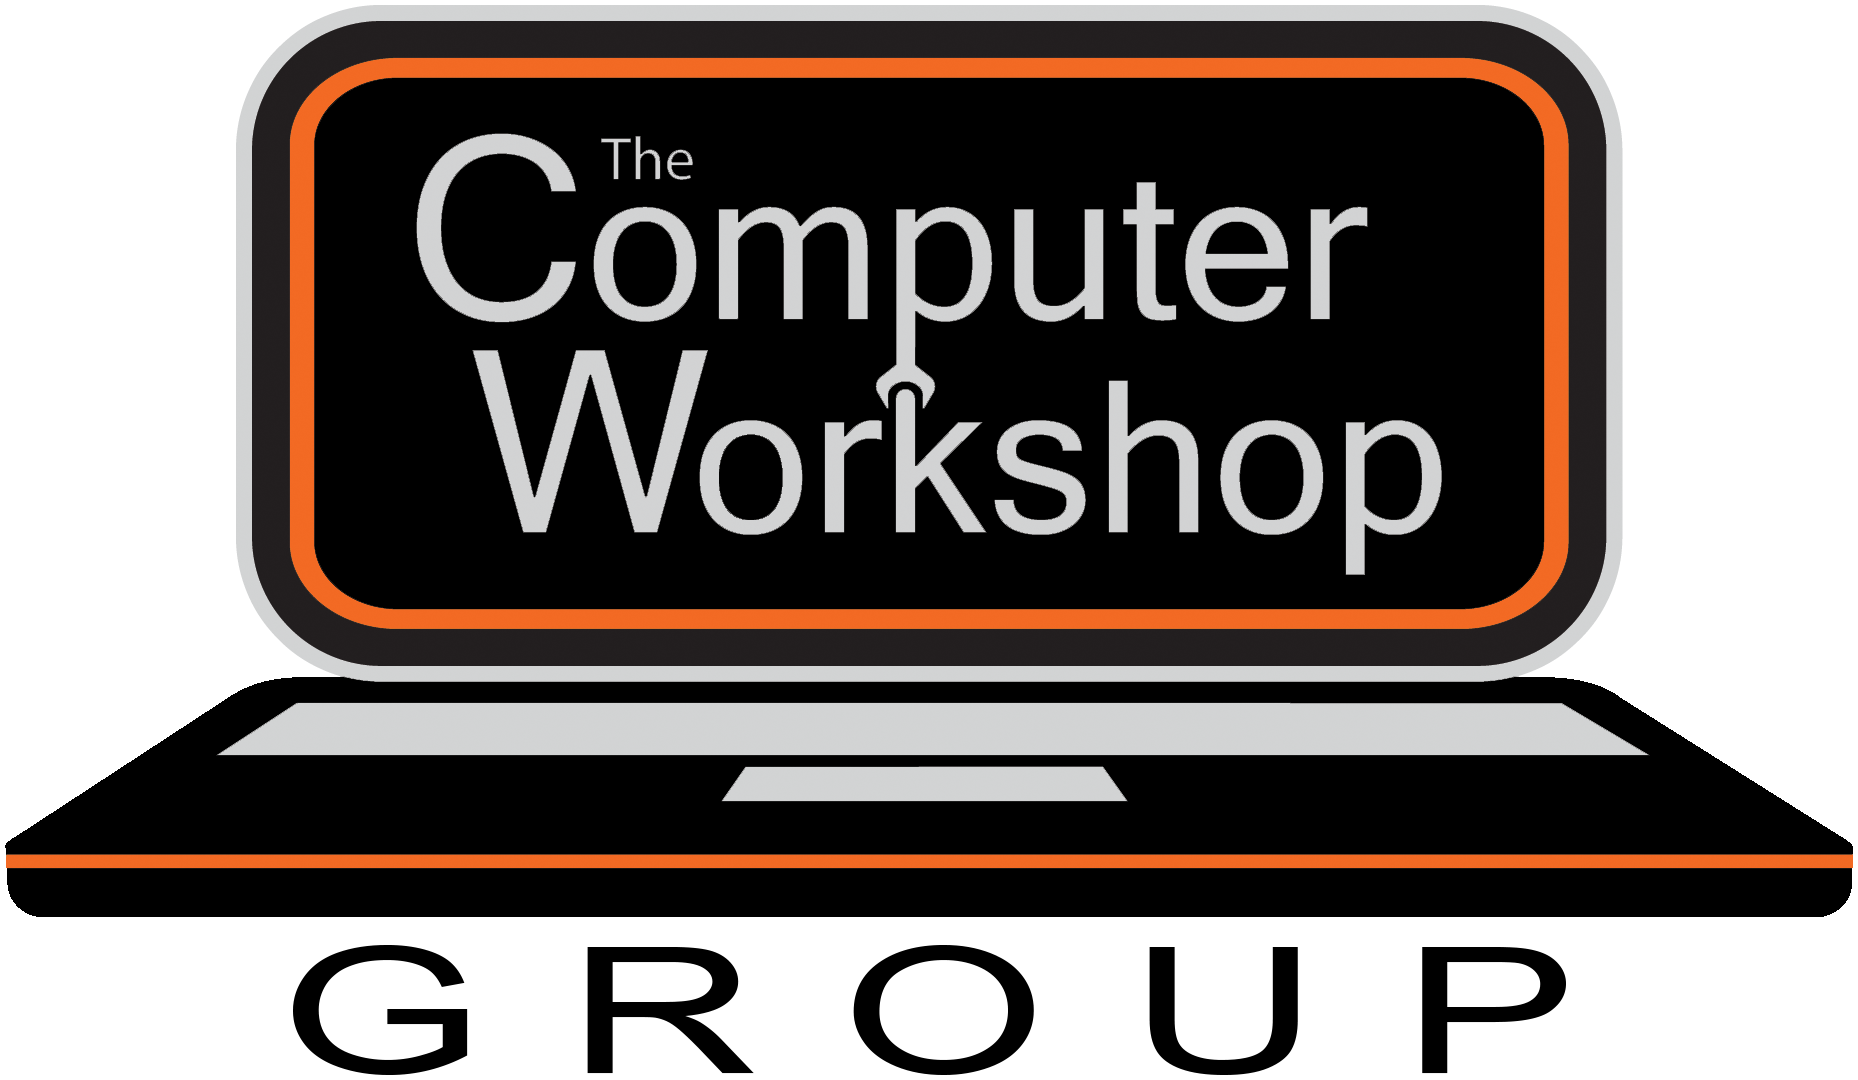 The Computer Workshop Group